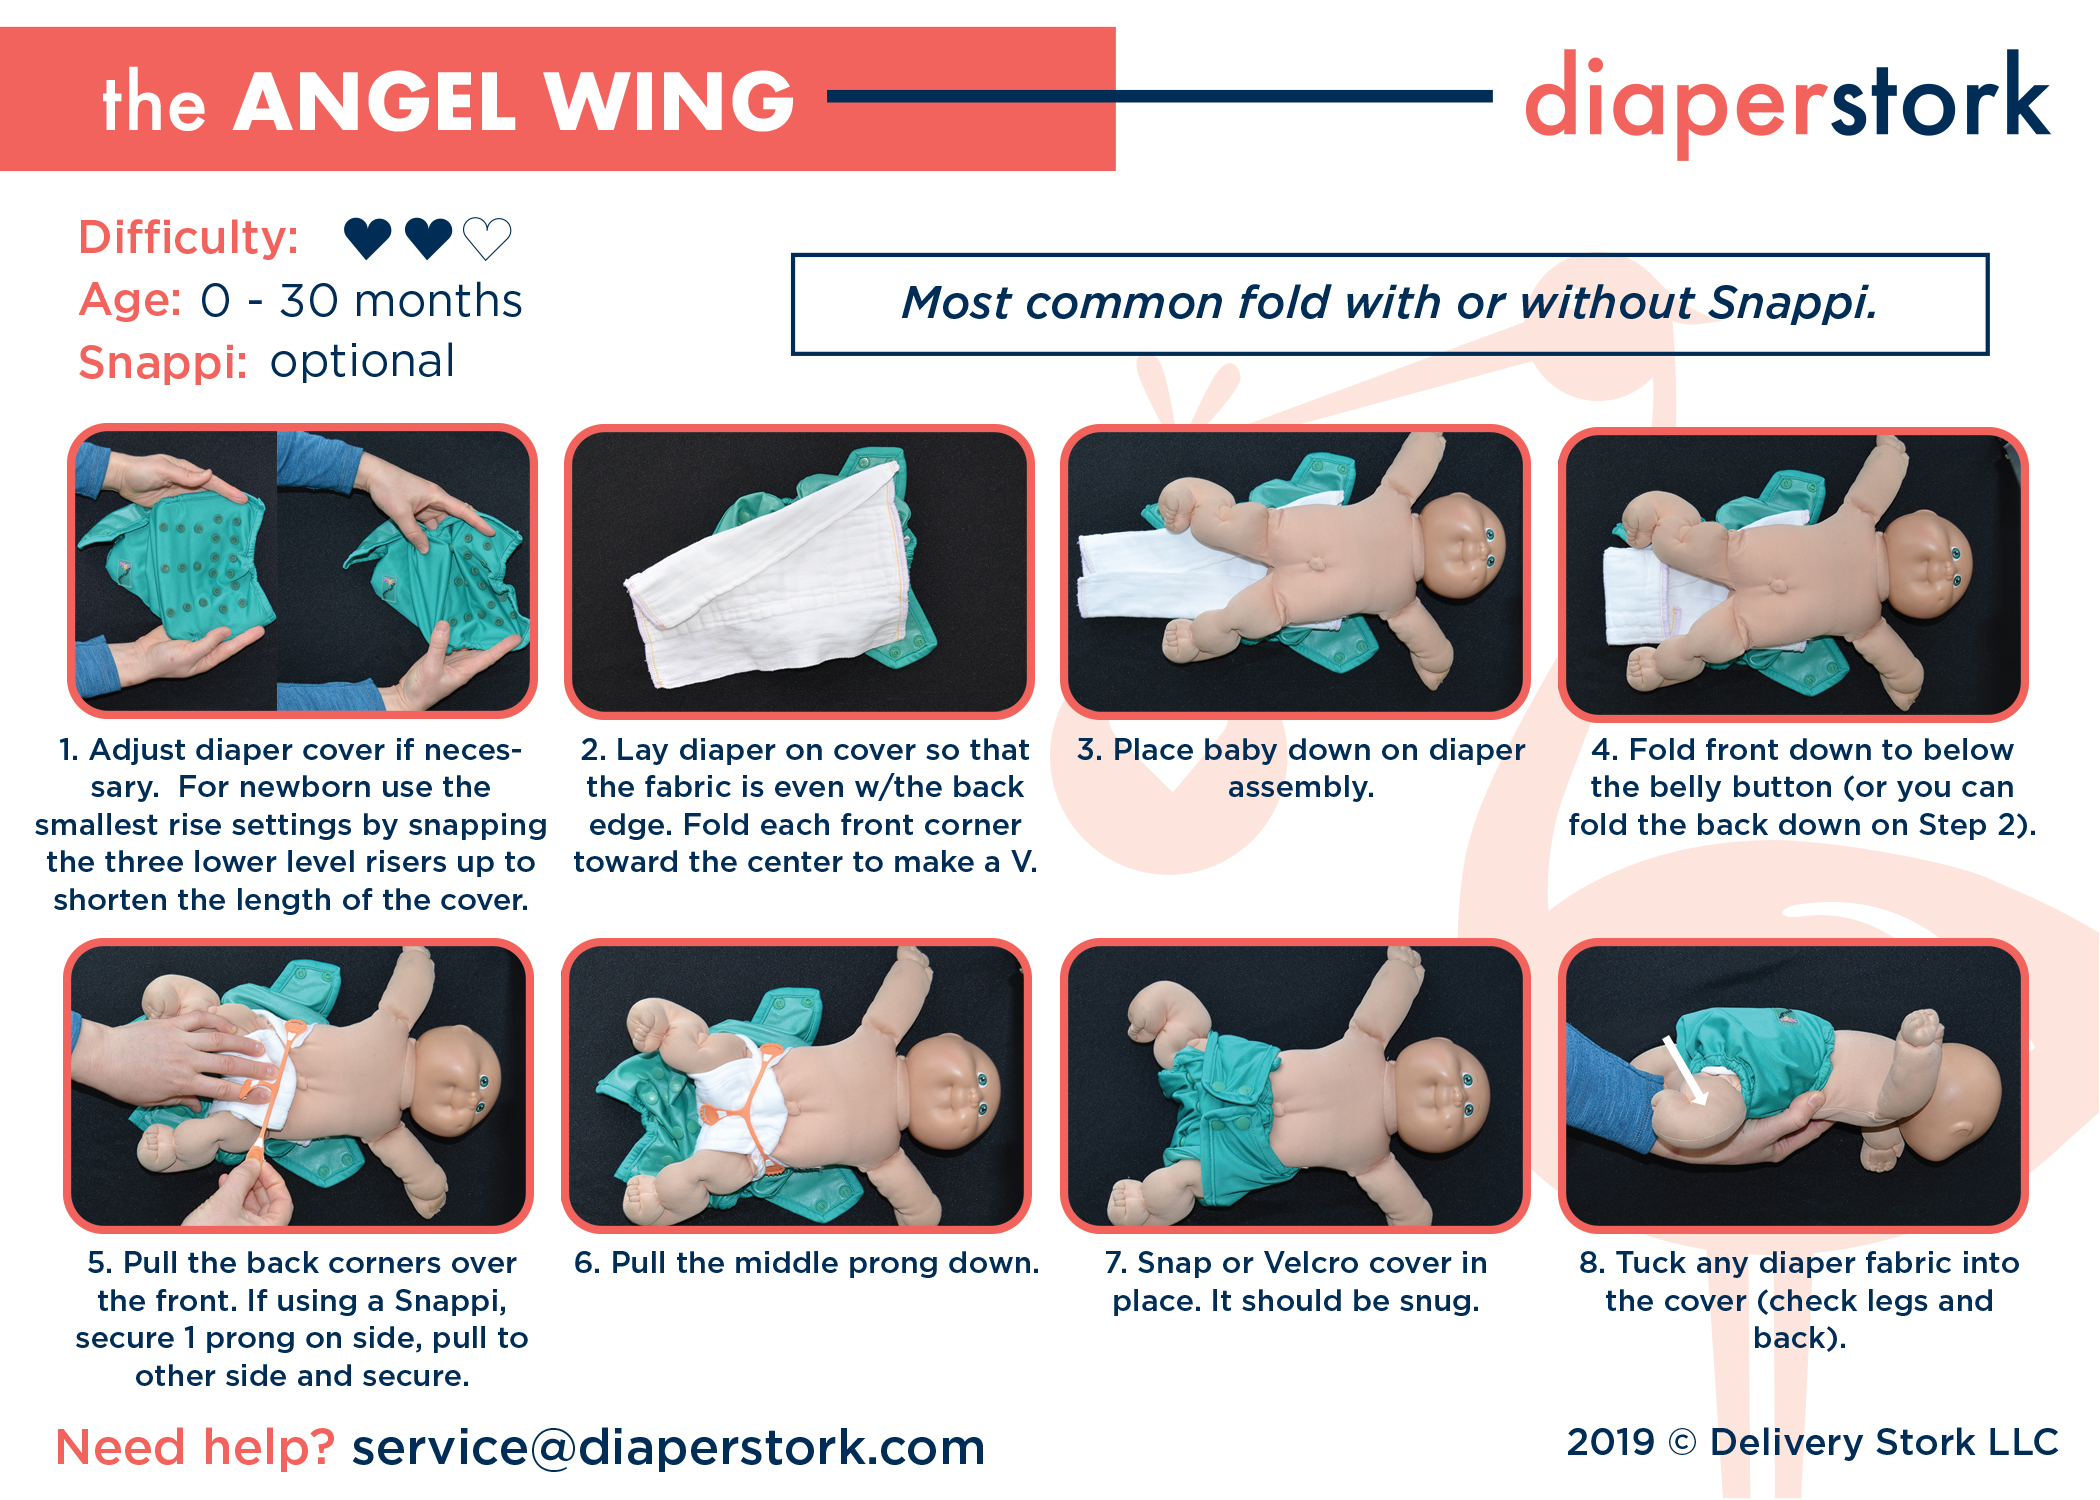 How to Remove Diaper Pins from Cloth Diapers: 5 Steps